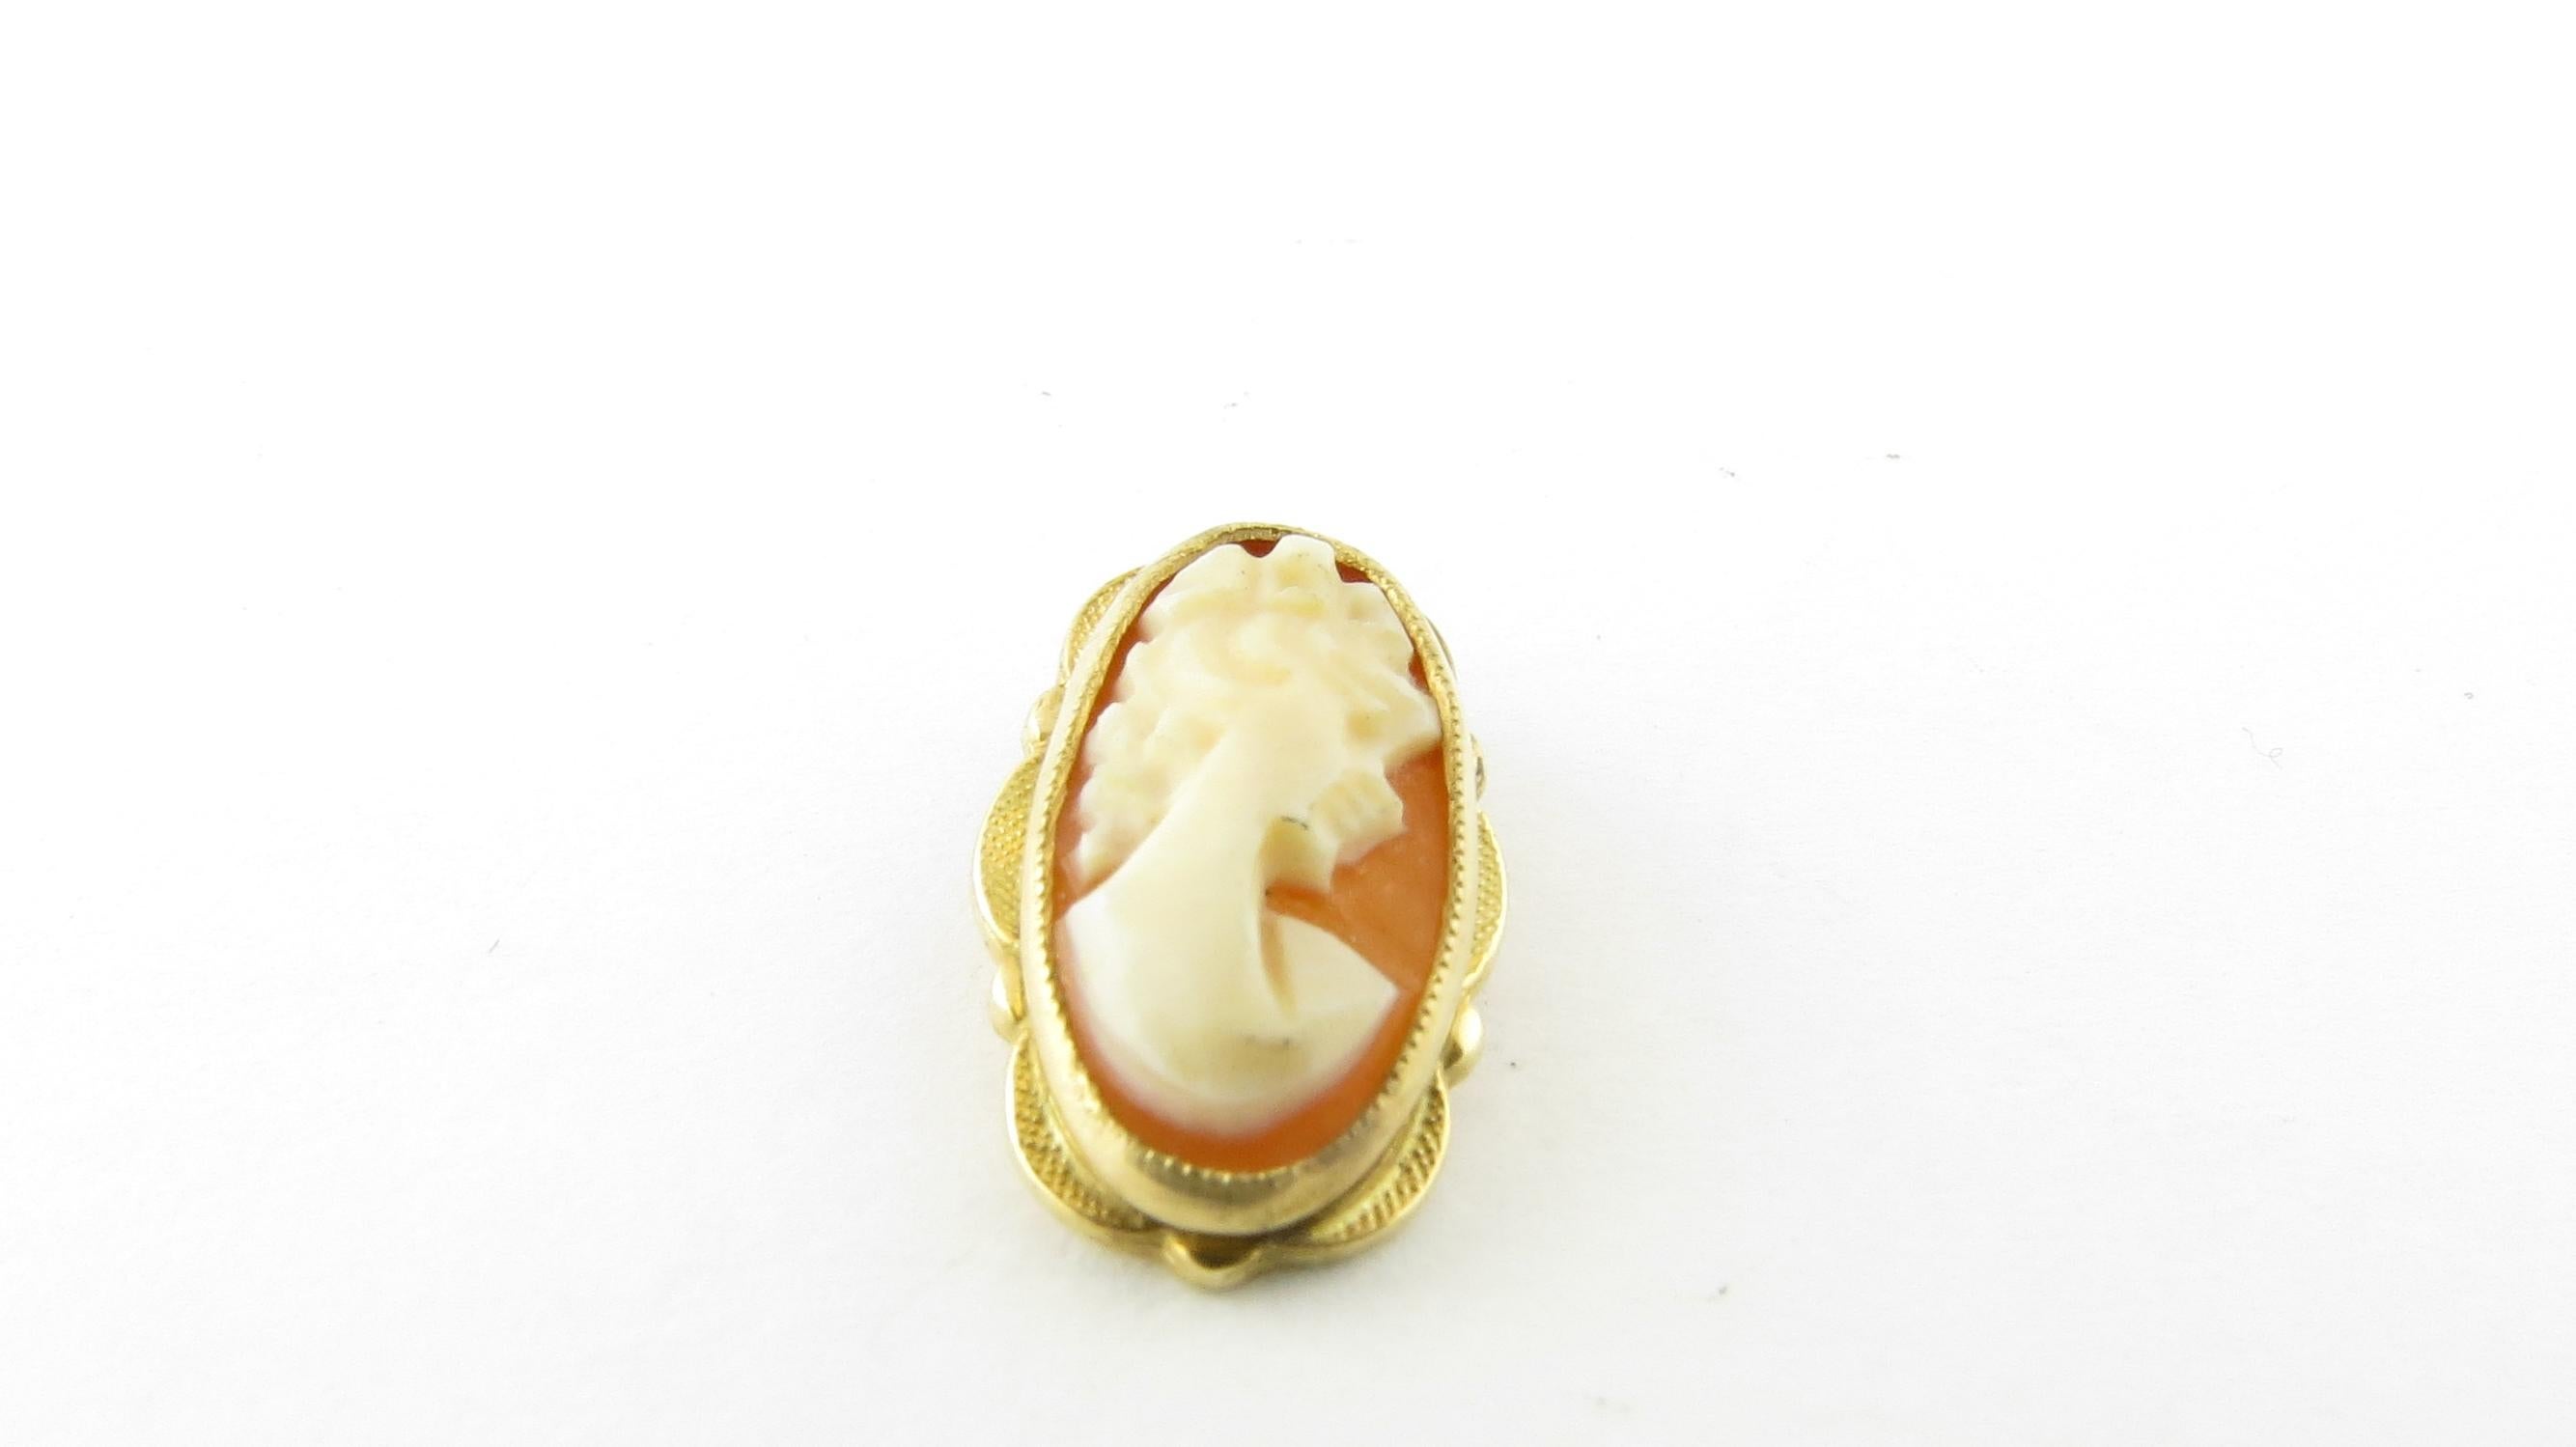 Vintage 14 Karat Yellow Gold Cameo Pendant

This lovely cameo pendant features a lovely lady in profile framed in beautifully detailed 14K yellow gold.

Size: 15 mm x 9 mm

Weight: 0.6 dwt. / 1.0 gr.

Acid tested for 14K gold.

Very good condition,